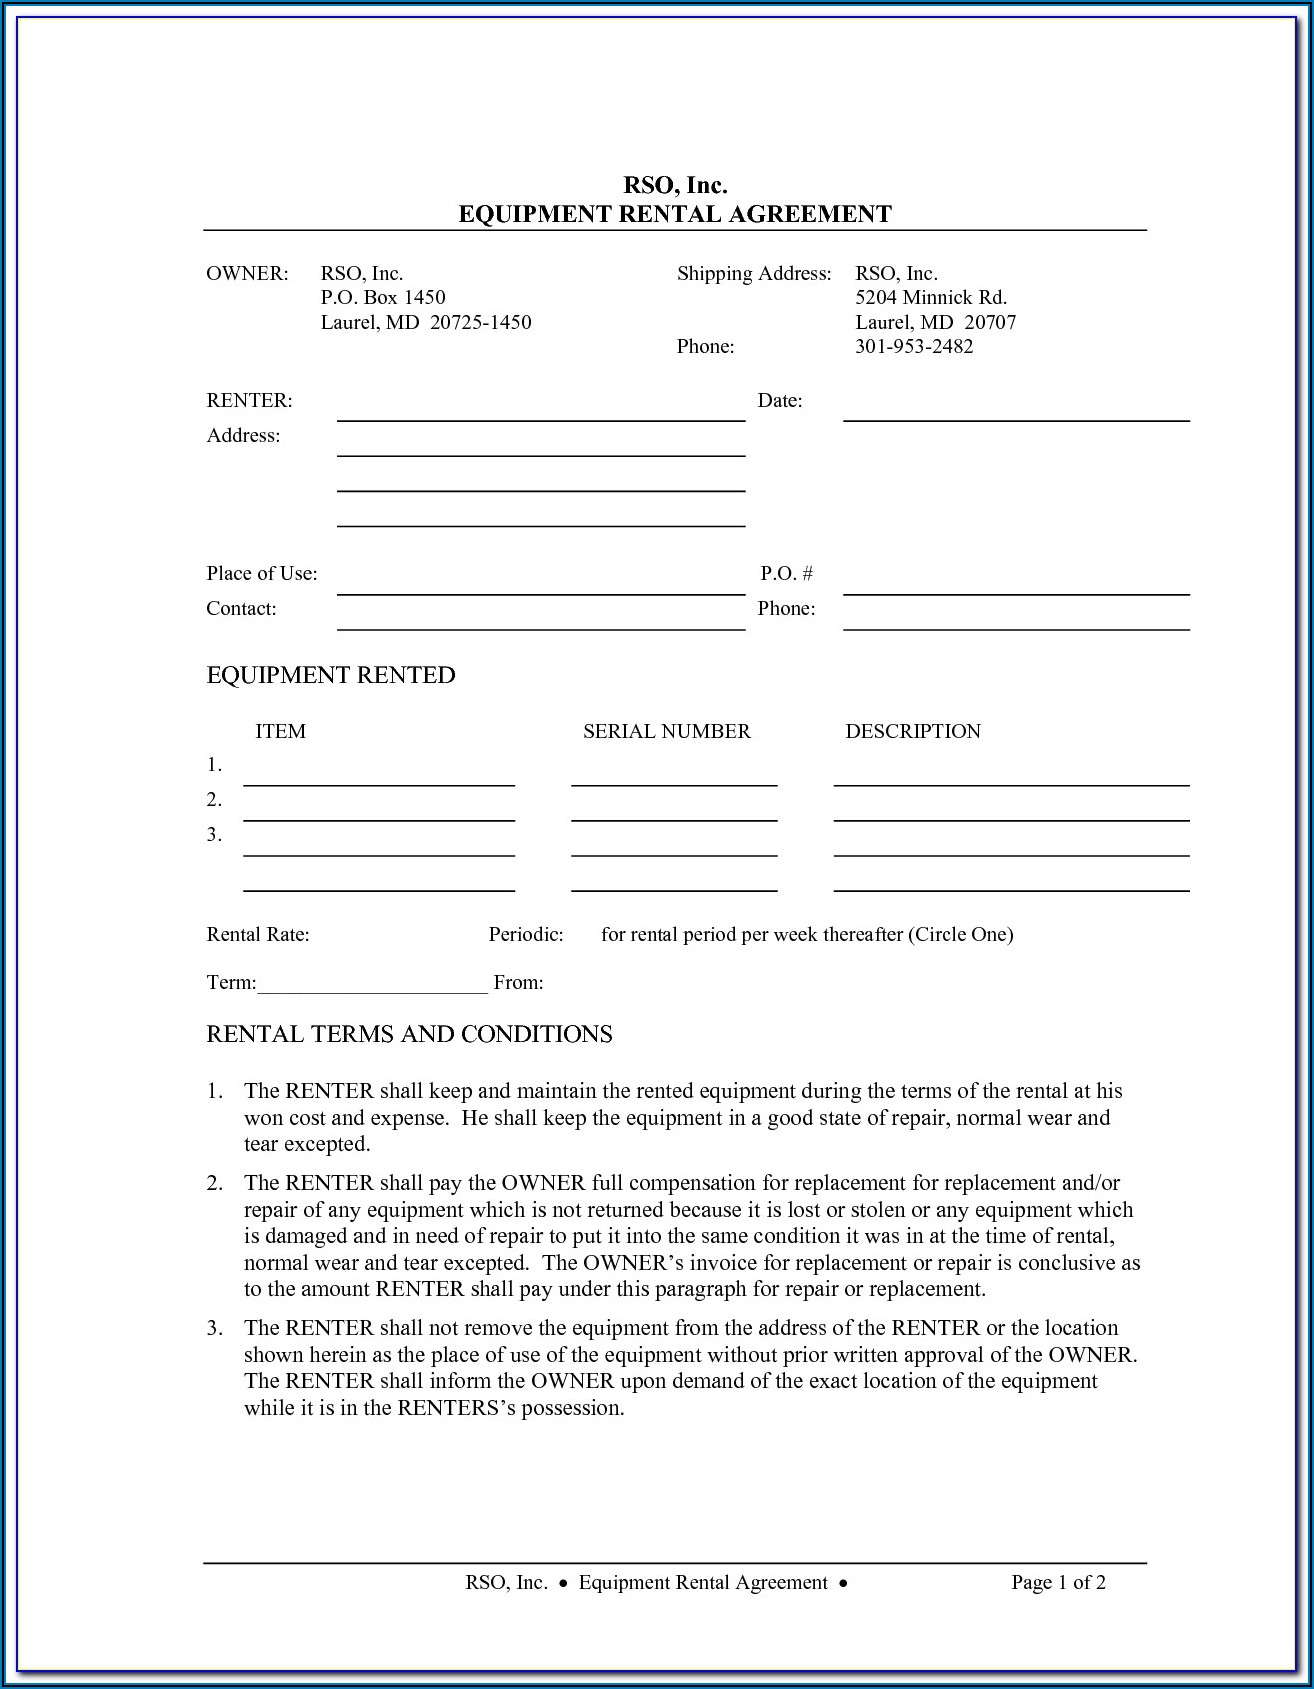 Equipment Rental Agreement Forms Free Download